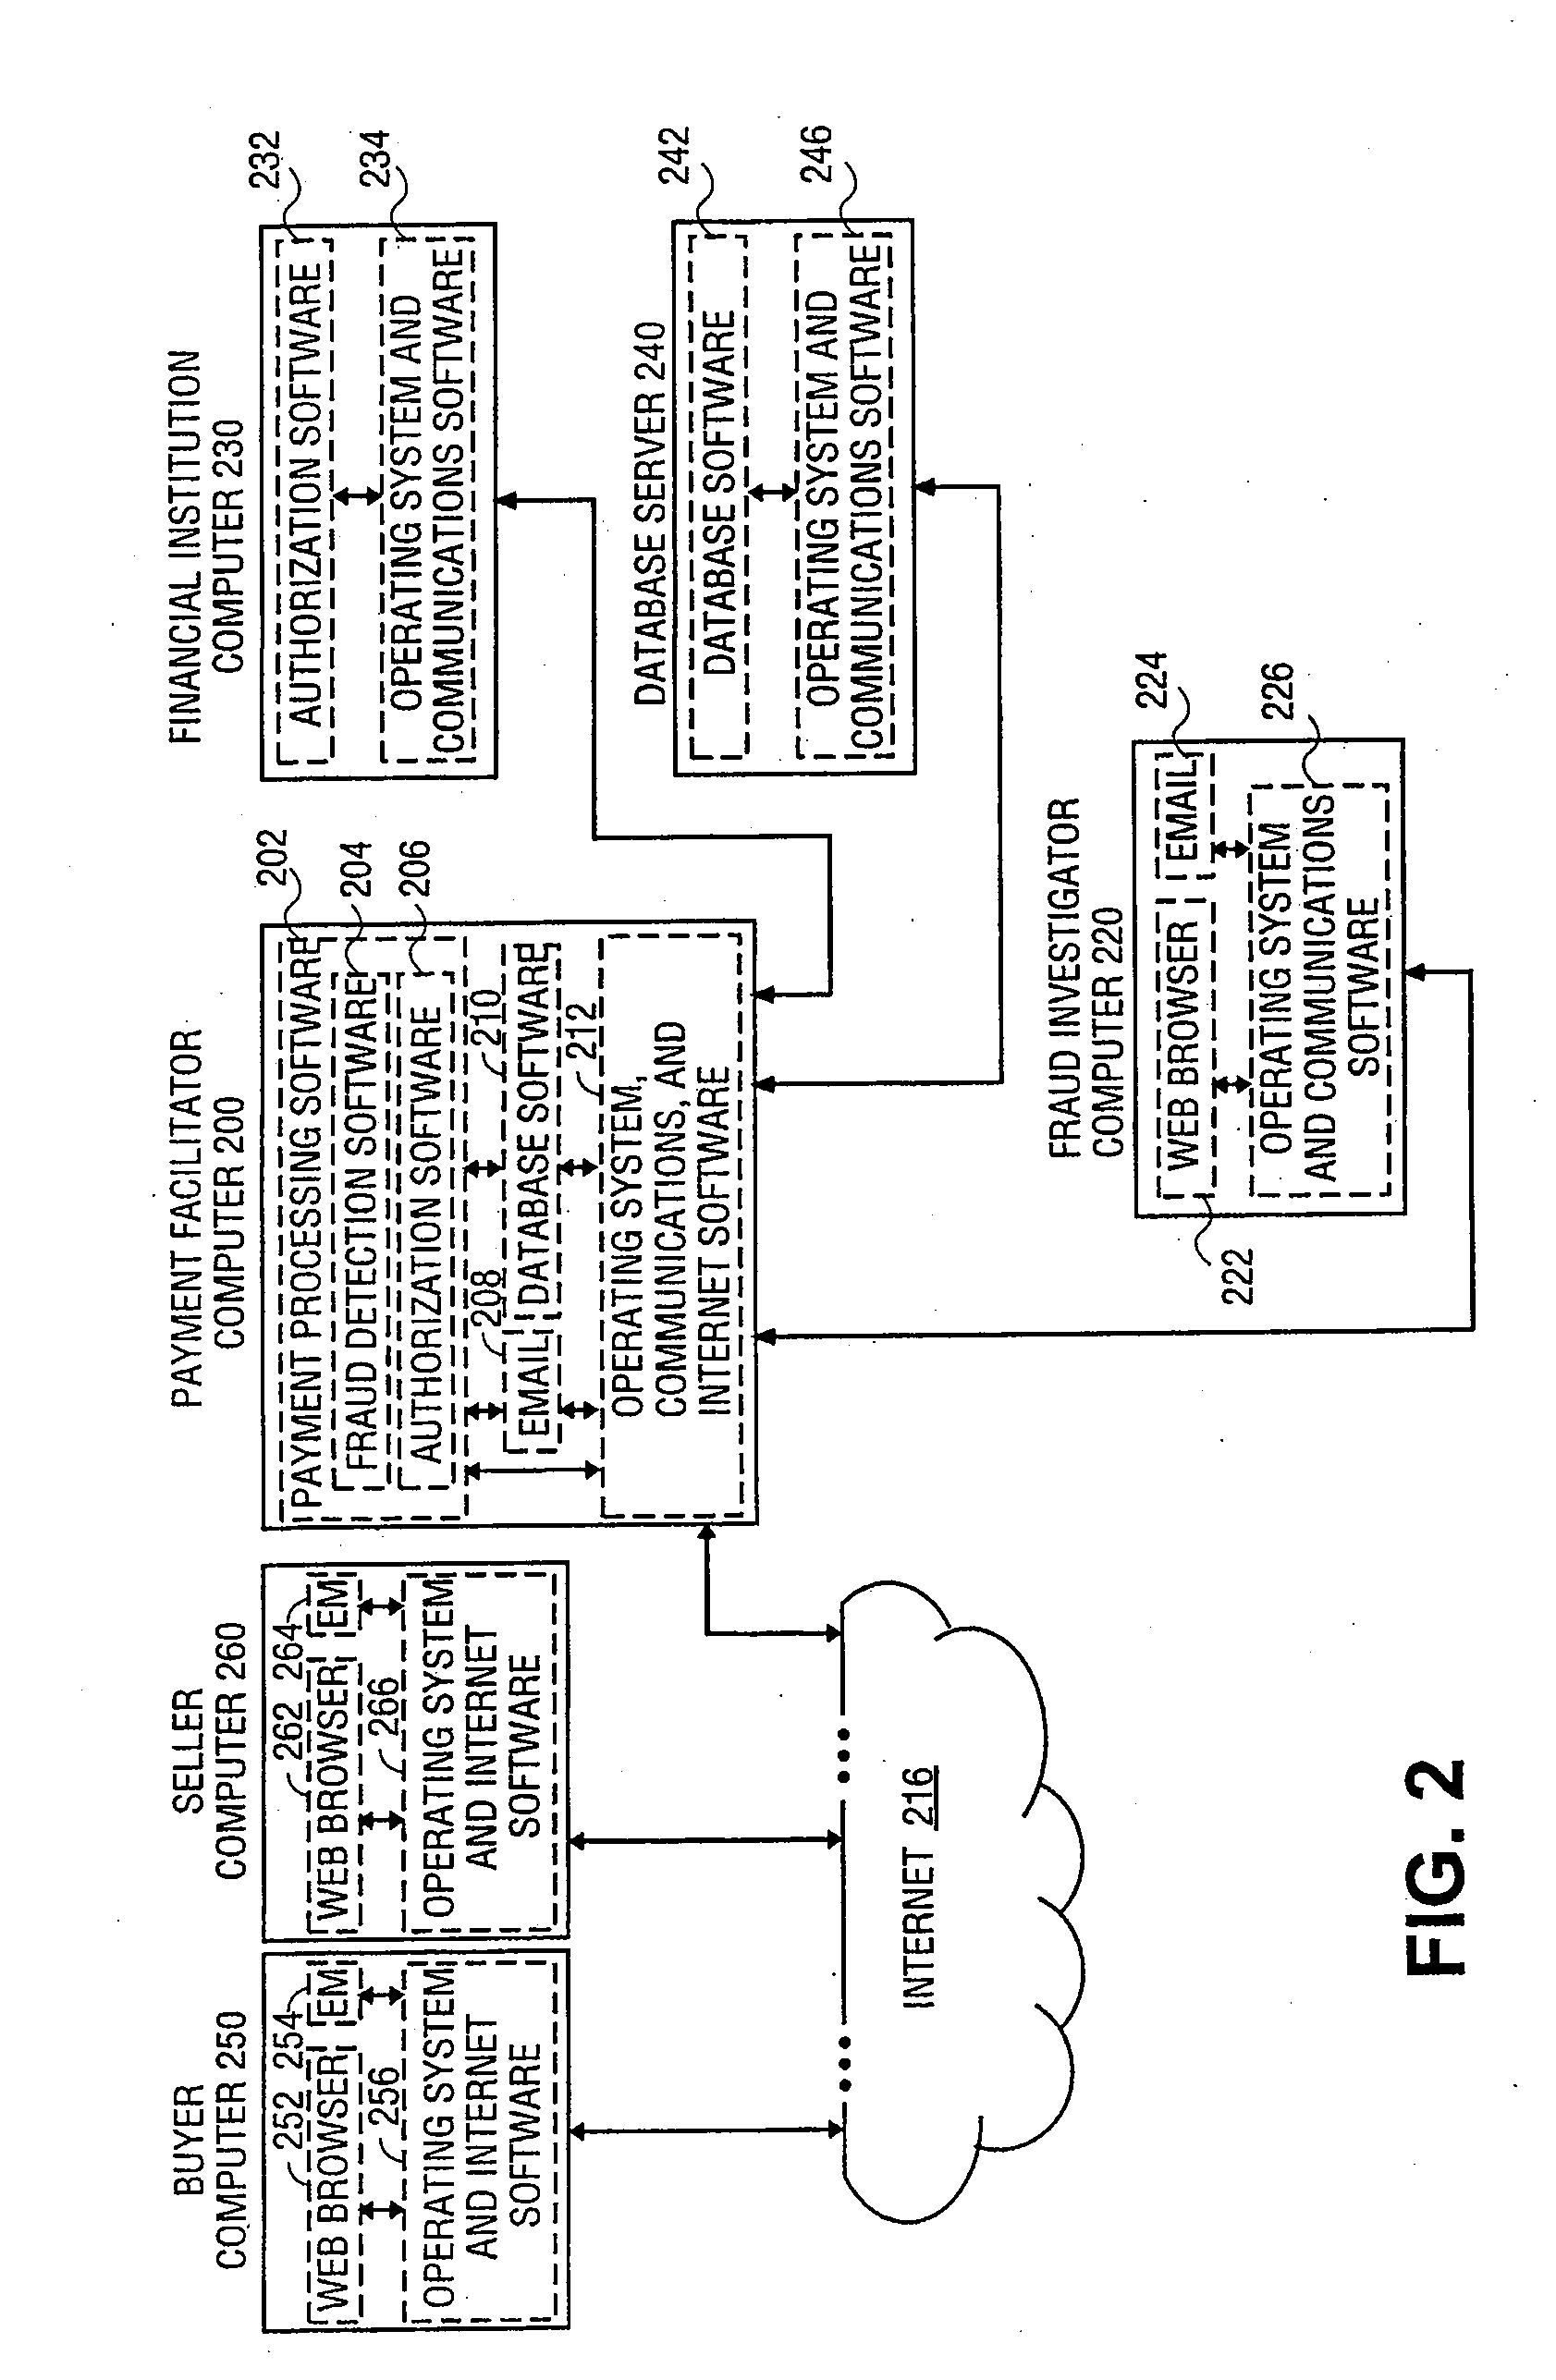 Method and system for detecting fraud